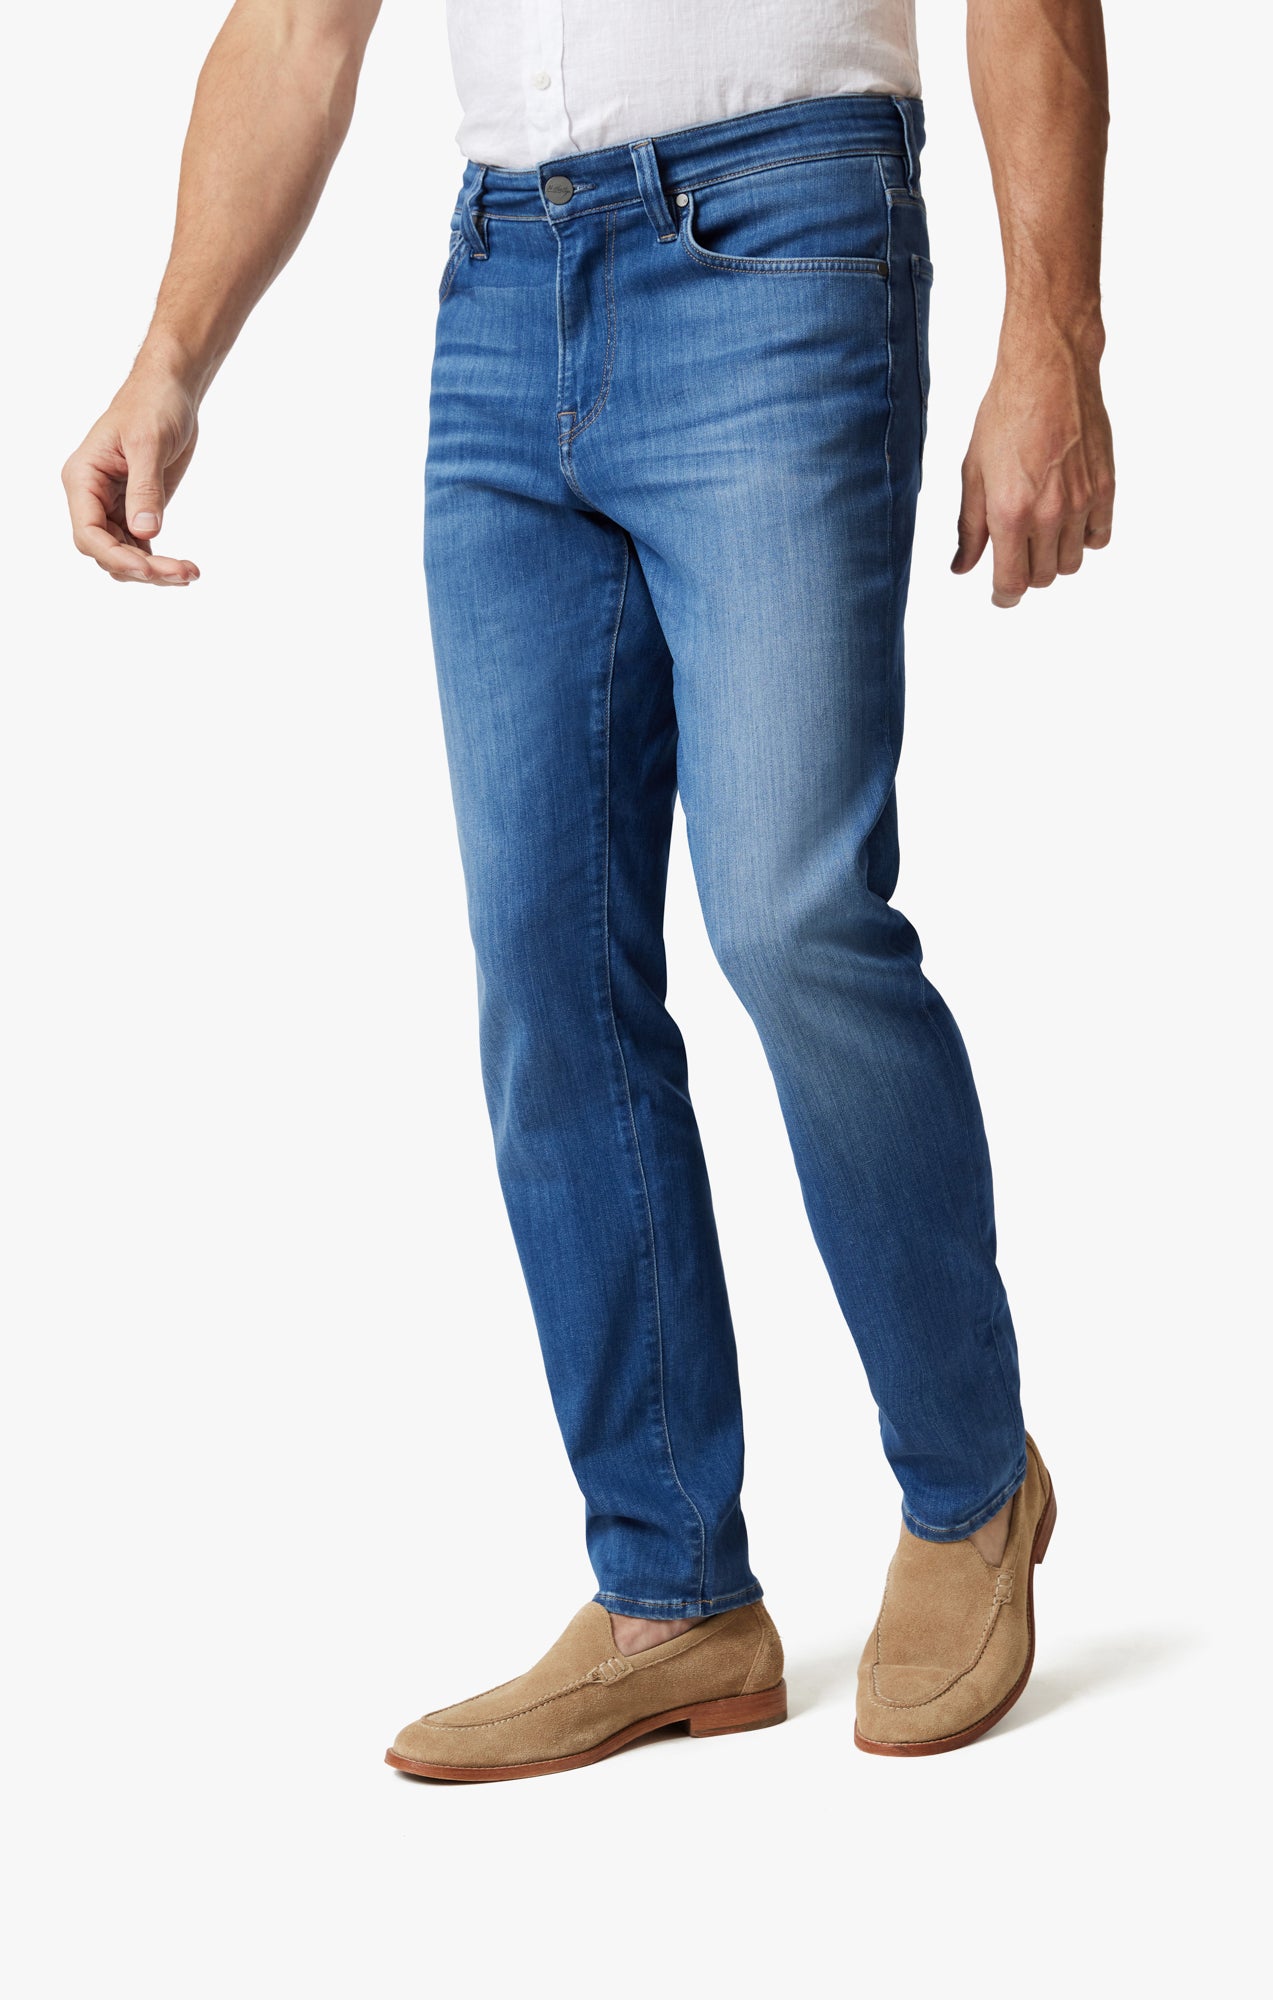 Champ Athletic Fit Jeans In Sky Refined